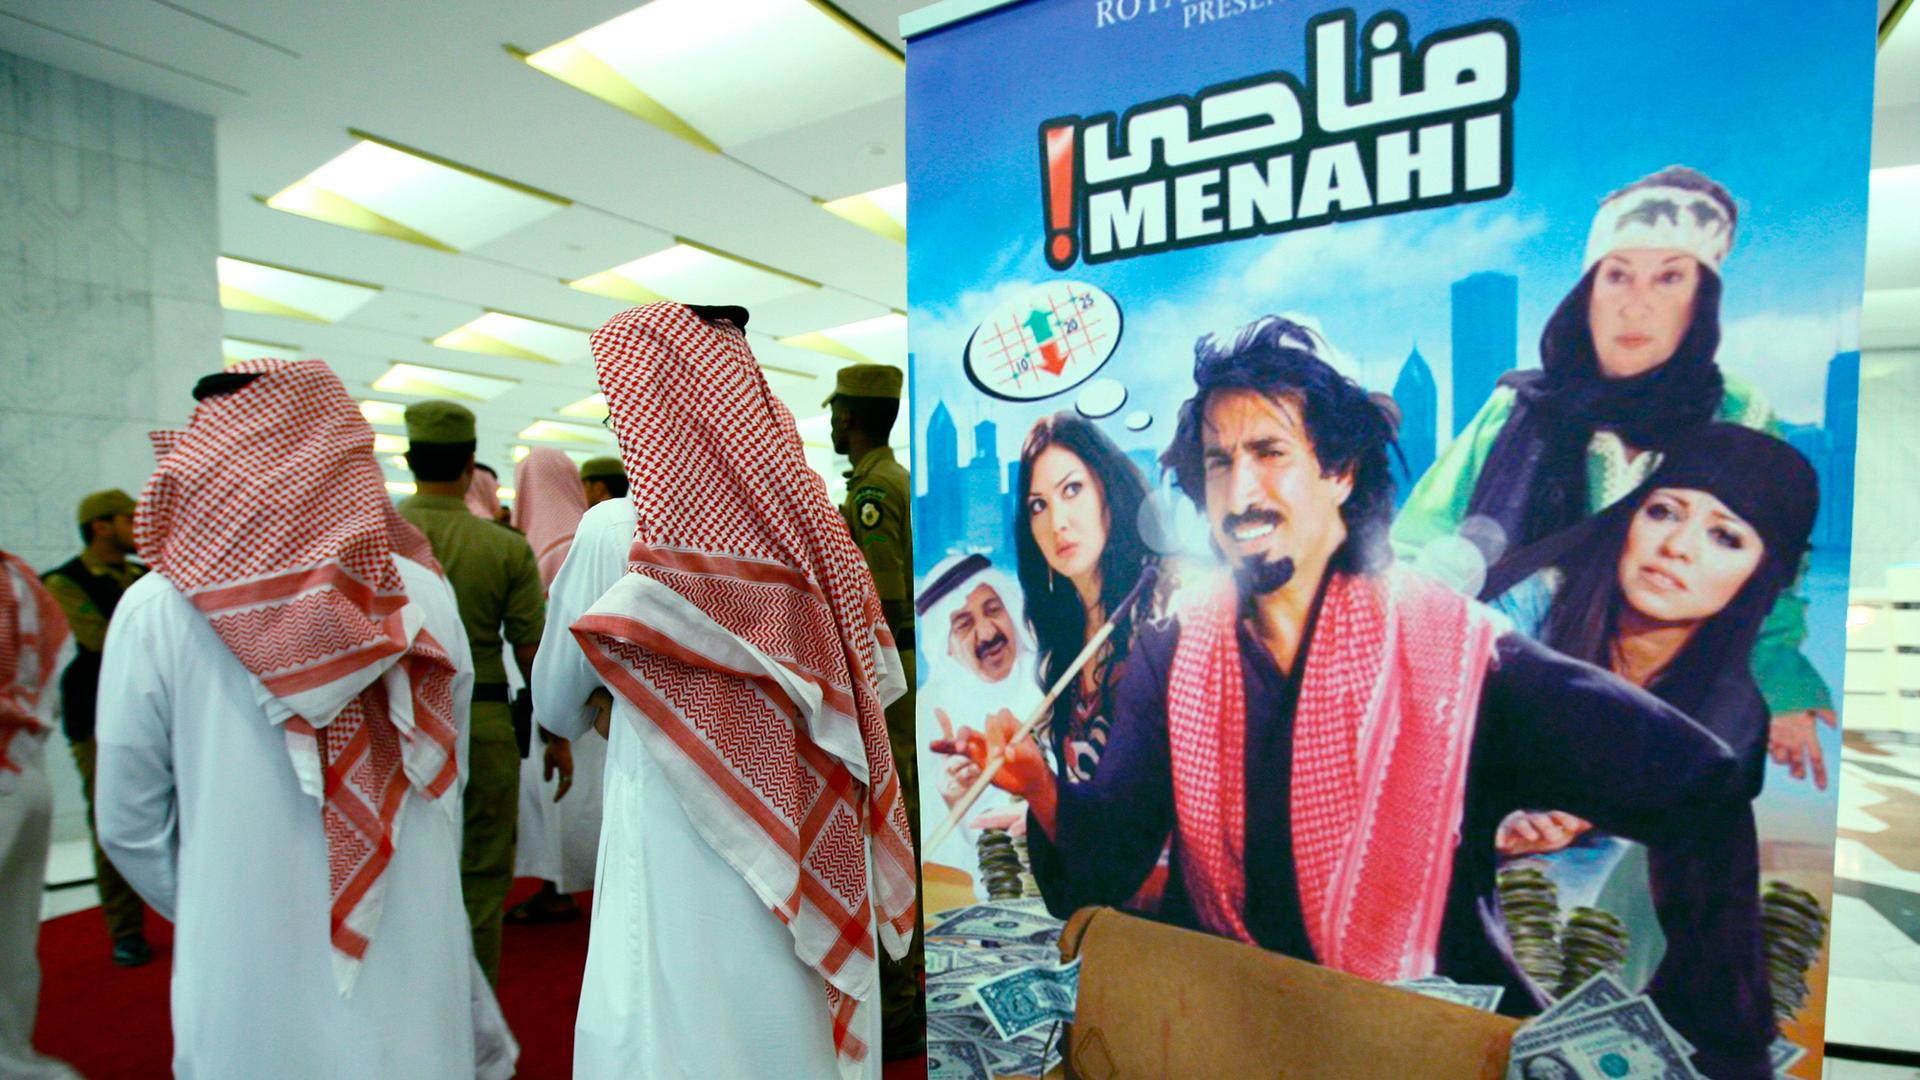 Saudi religious men stand near a poster of the first Saudi film "Menhai" at its opening at King Fahad Center in Riyadh June 6, 2009.